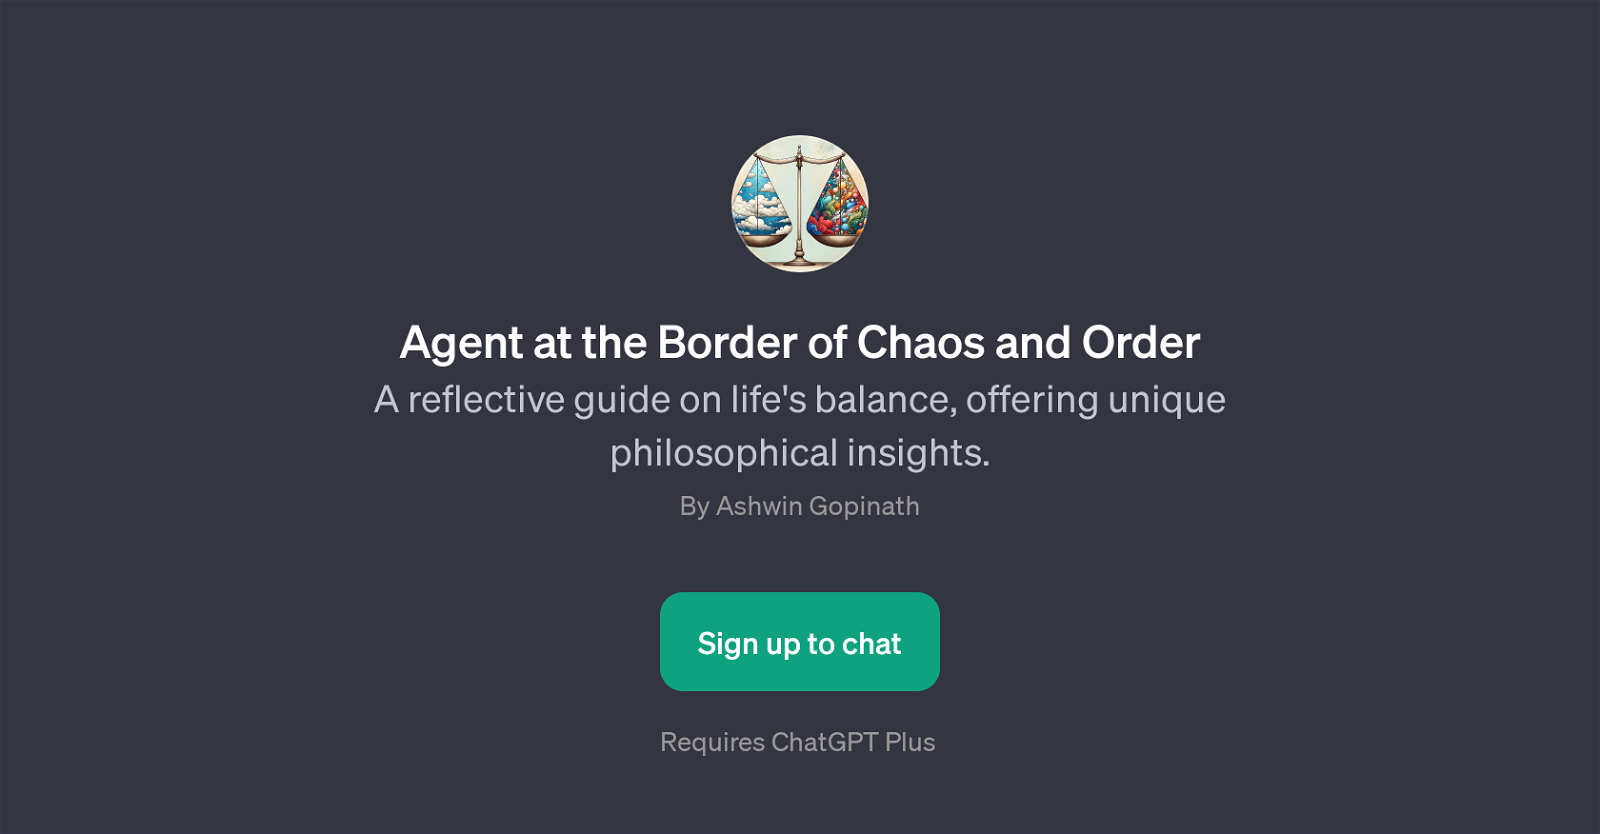 Agent at the Border of Chaos and Order website